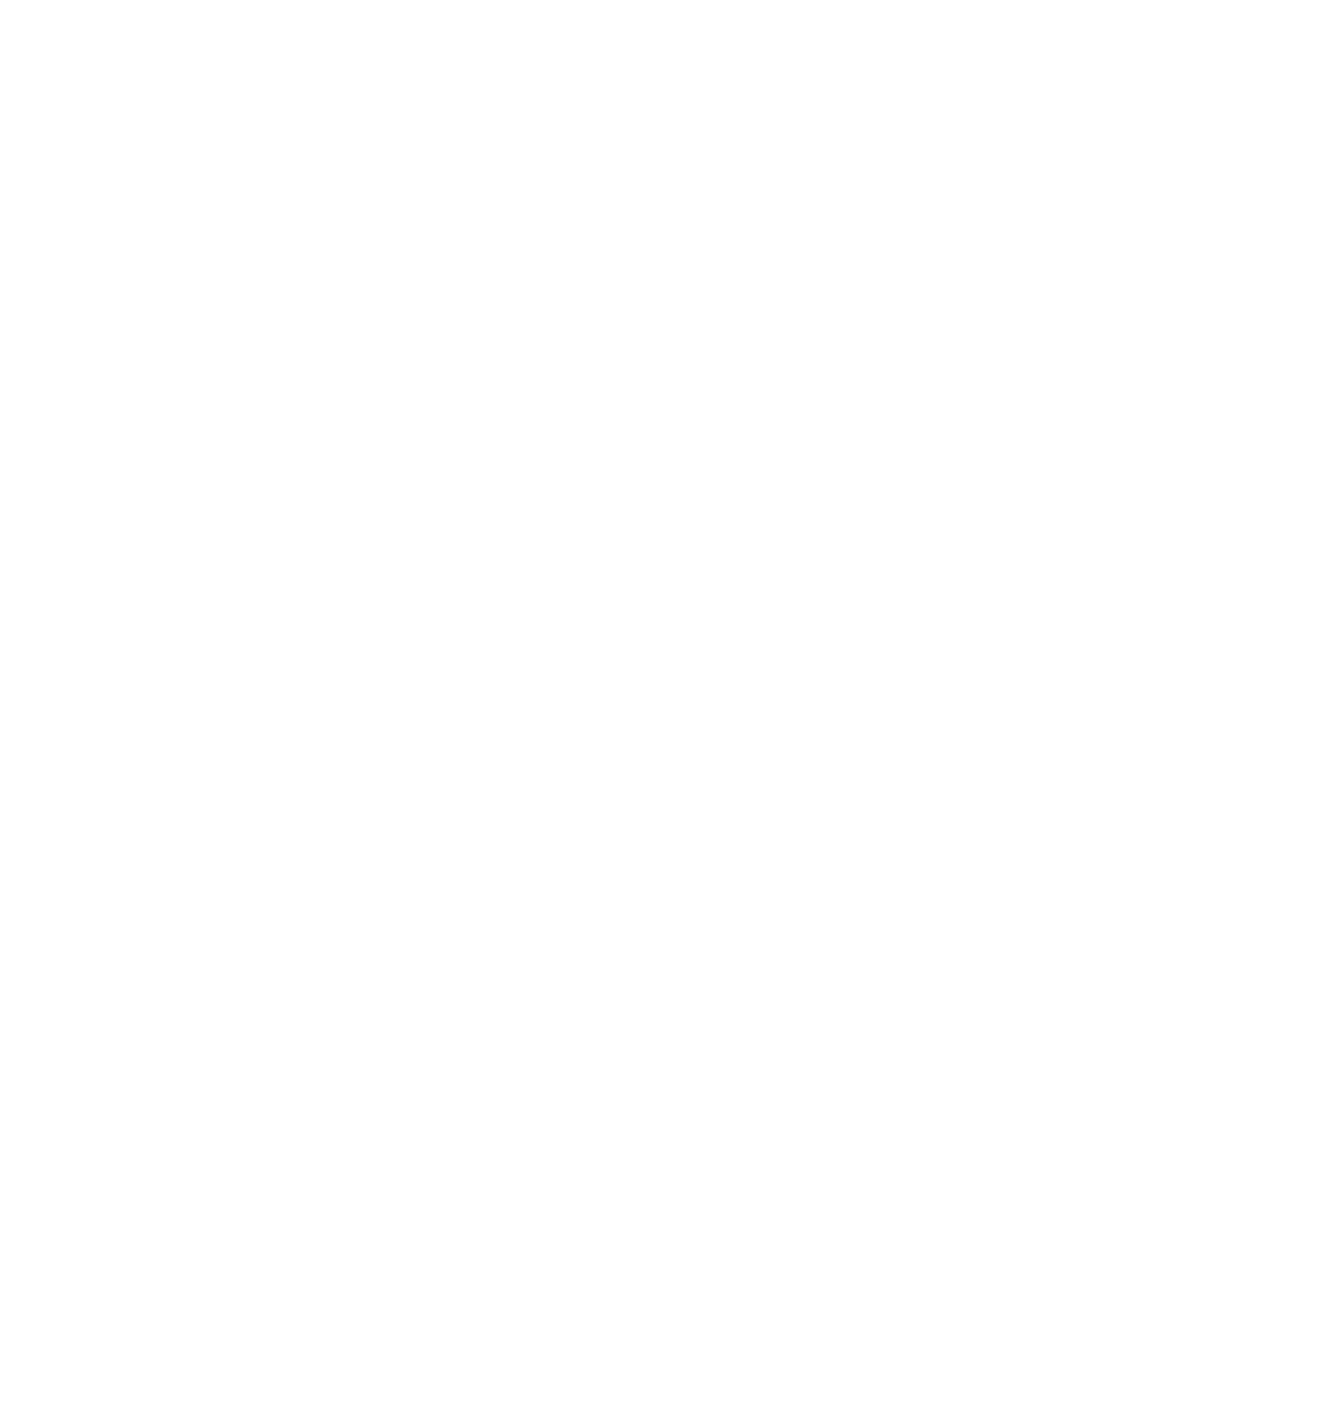 19thライヴサーキット PG wasn't built in a day 2024.01.13-03.31